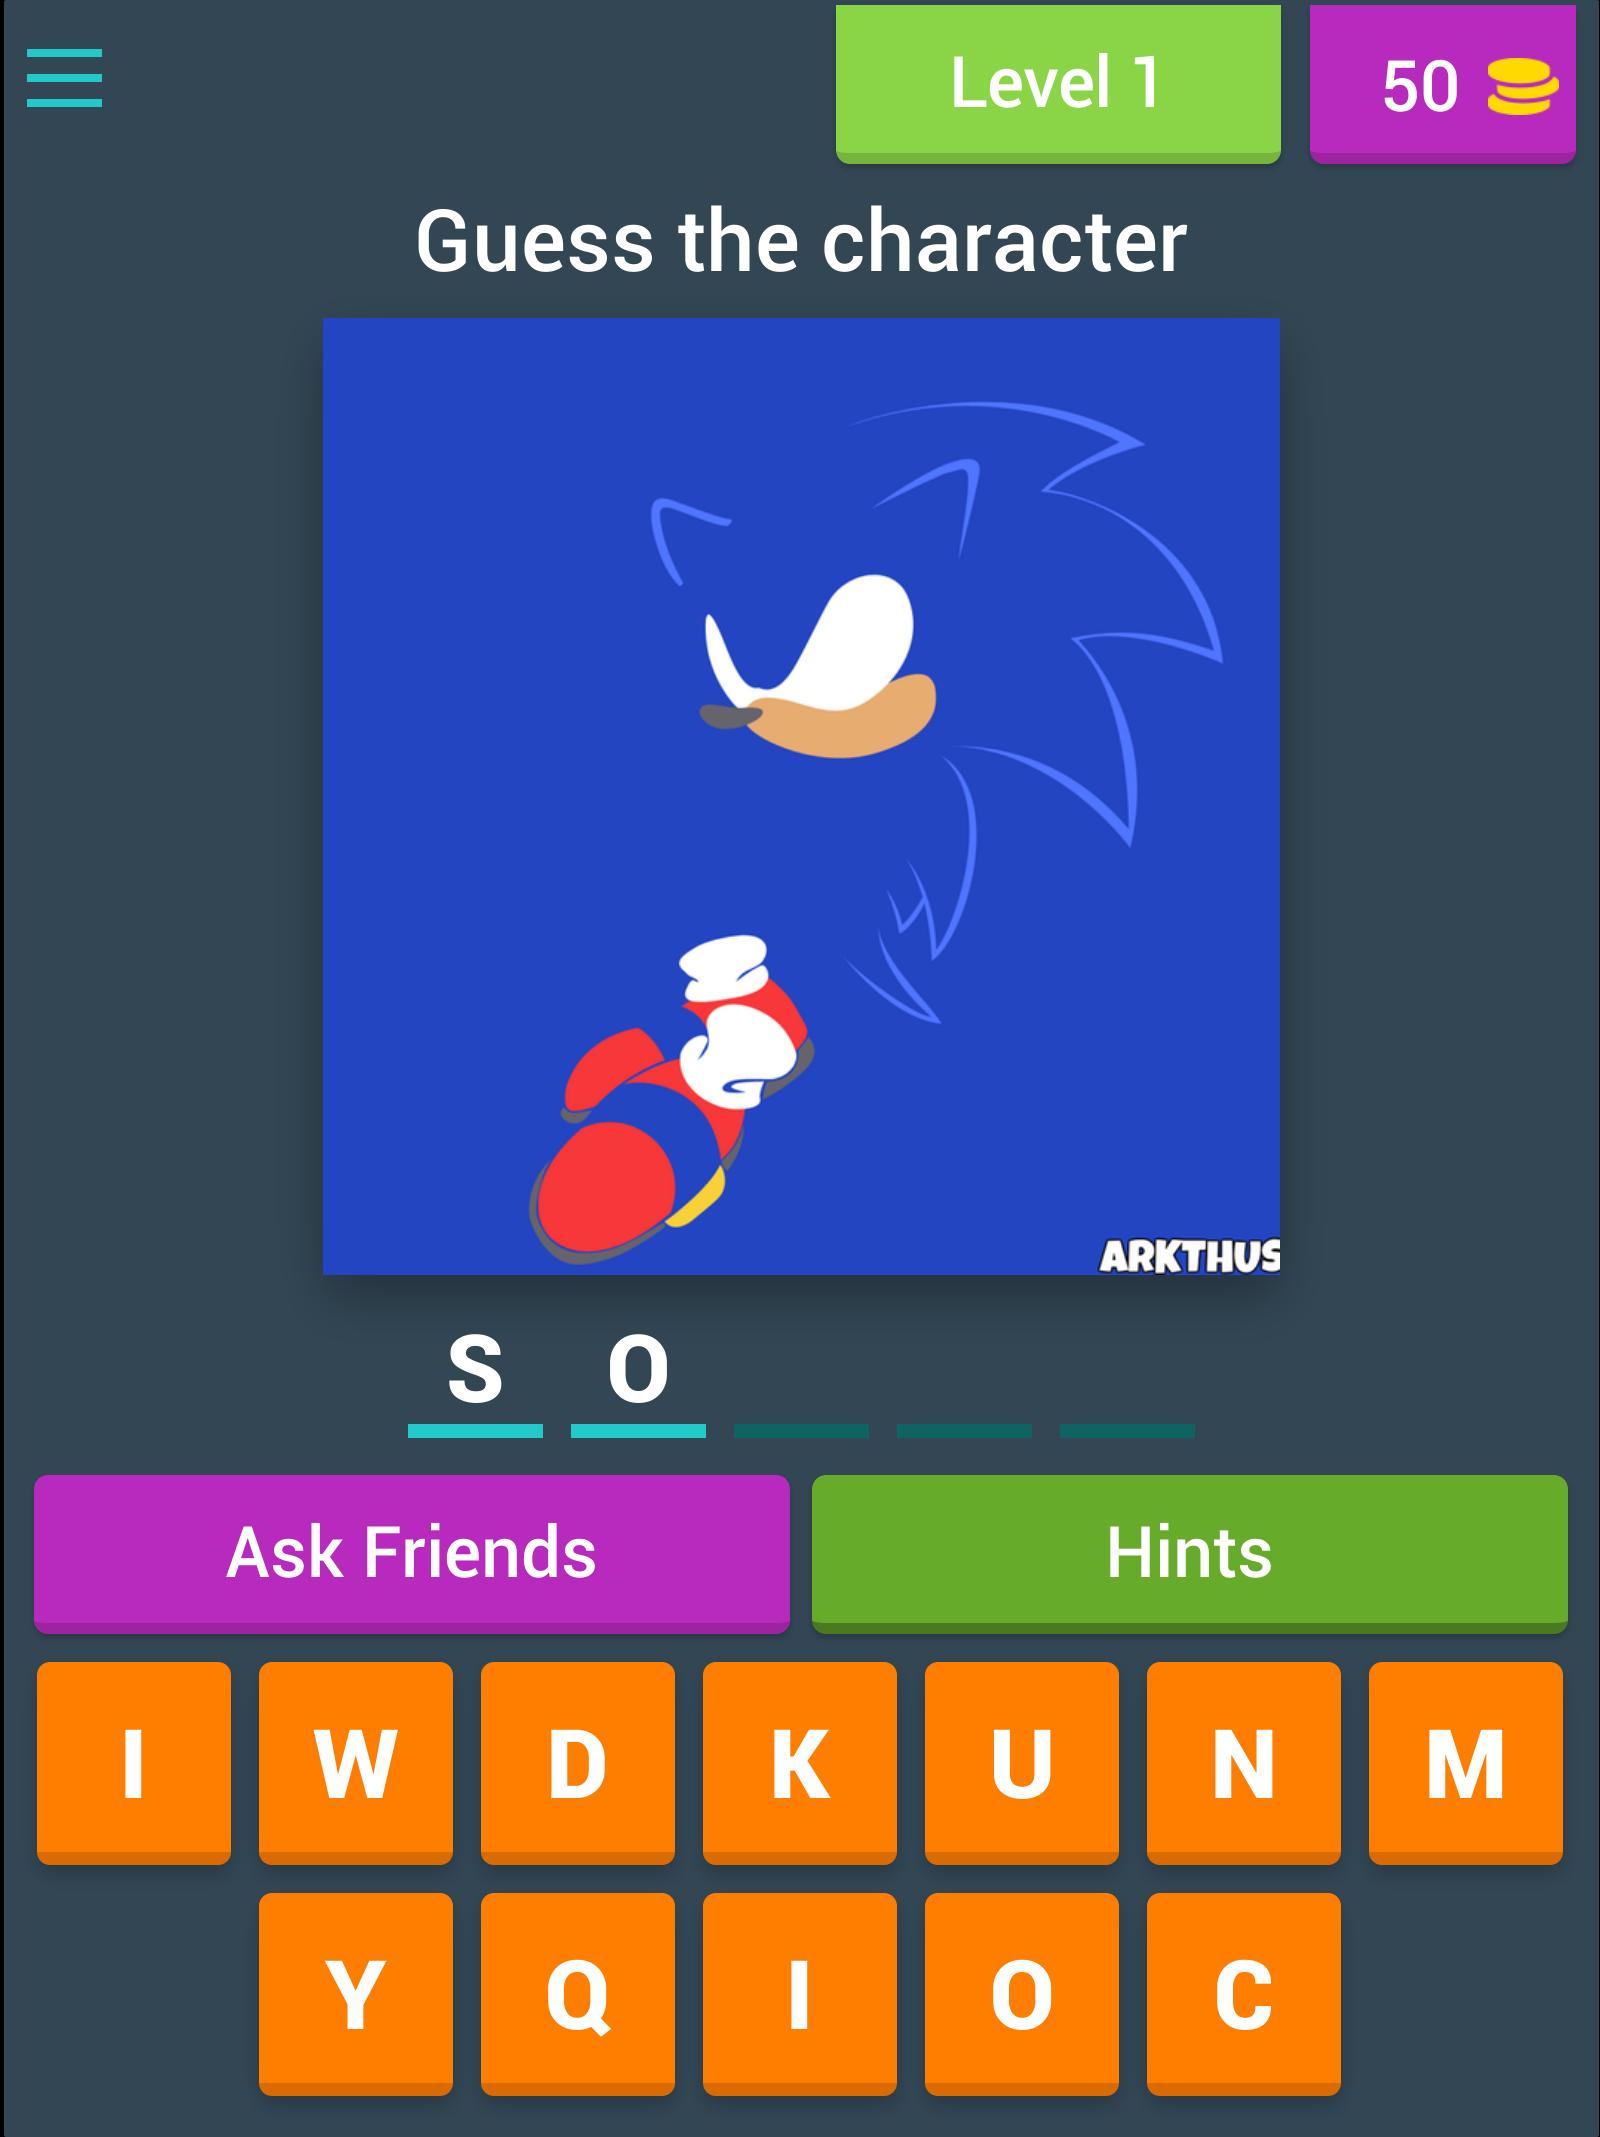 Guess Who? Video Game Edition for Android - APK Download